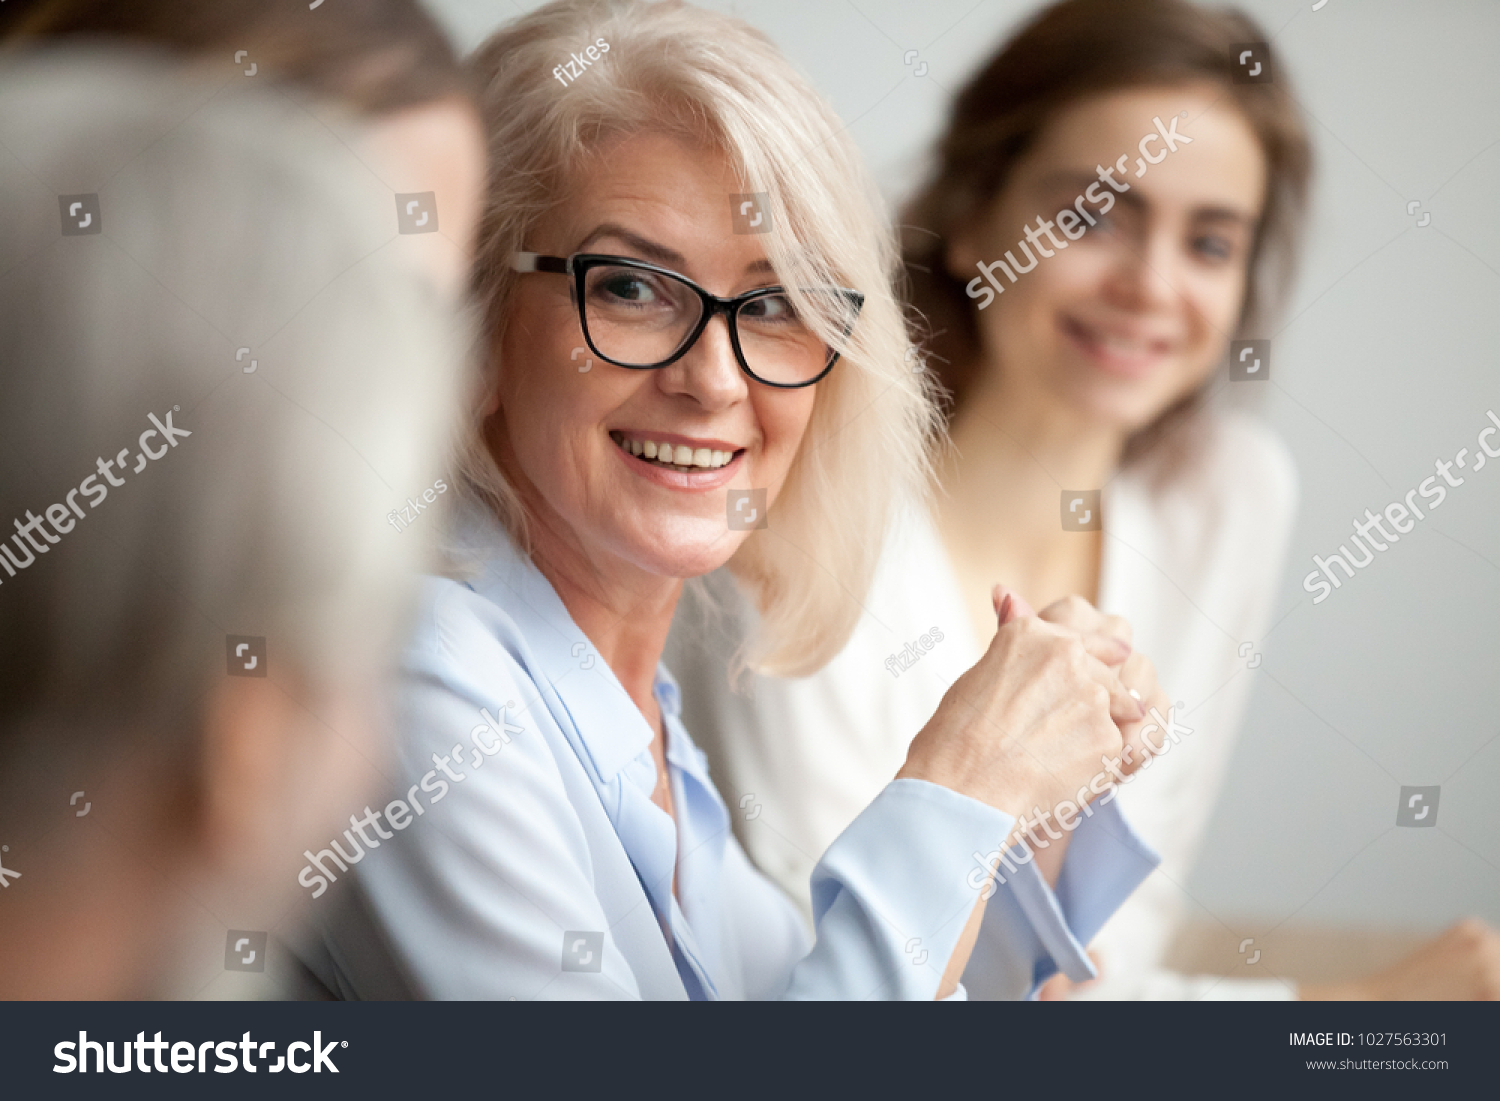 Smiling aged businesswoman in glasses looking at colleague at team meeting, happy attentive female team leader listening to new project idea, coach mentor teacher excited by interesting discussion #1027563301